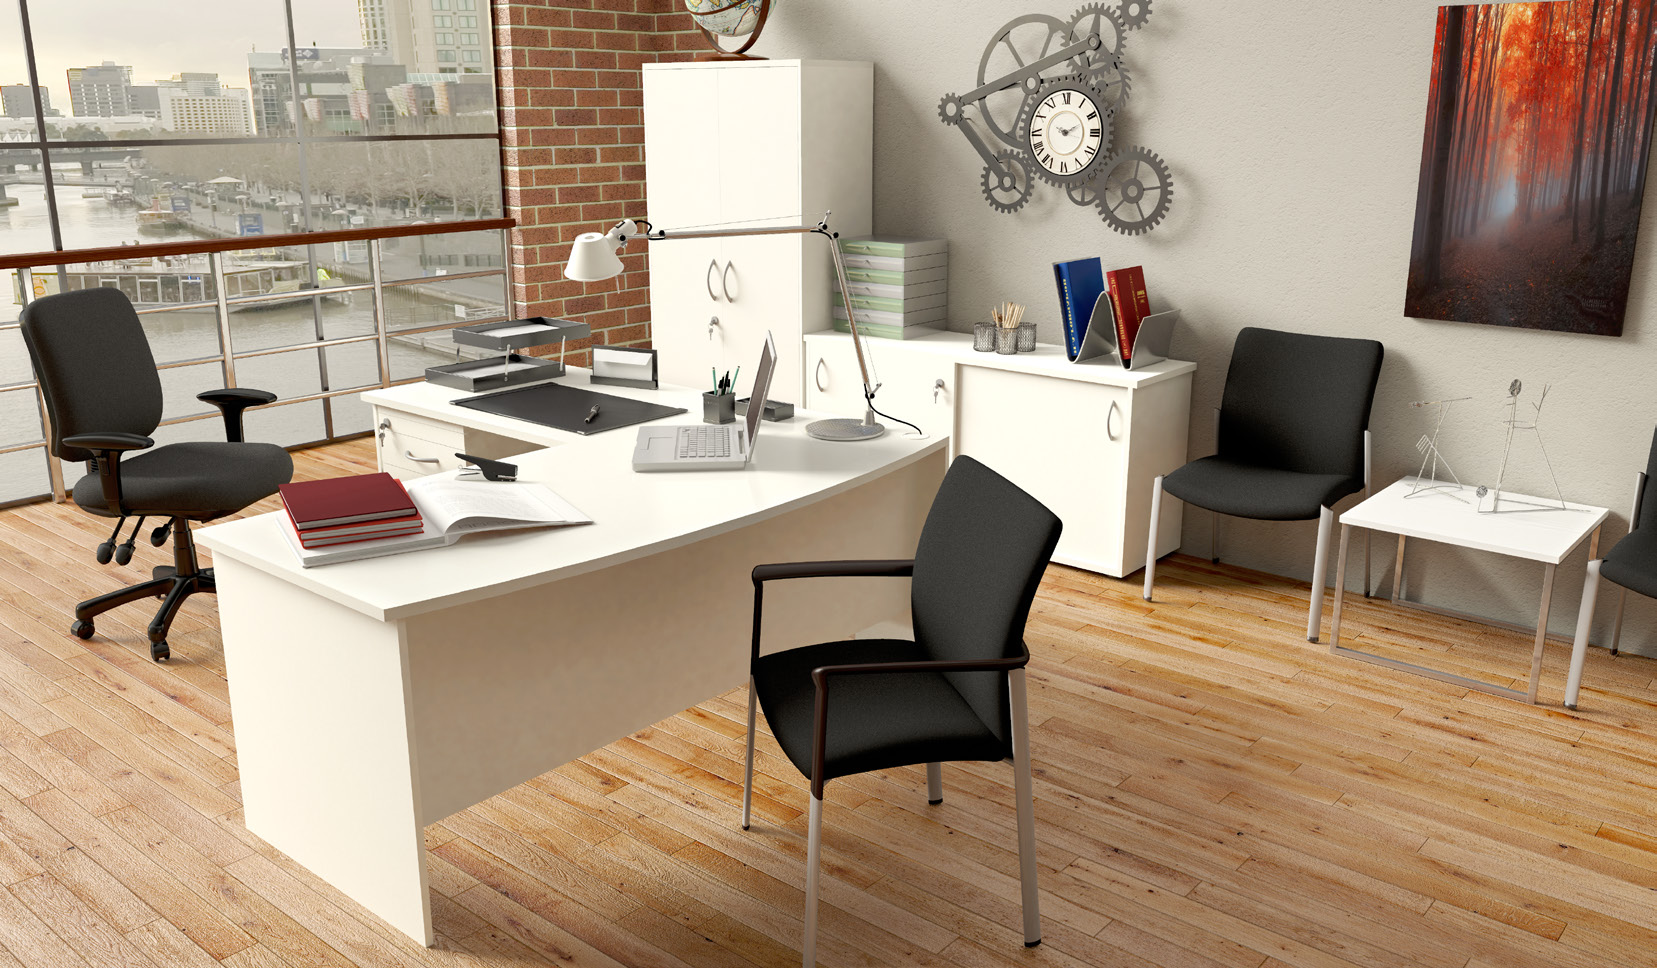 How To Choose The Best Ergonomic Executive Chair For Your Office?